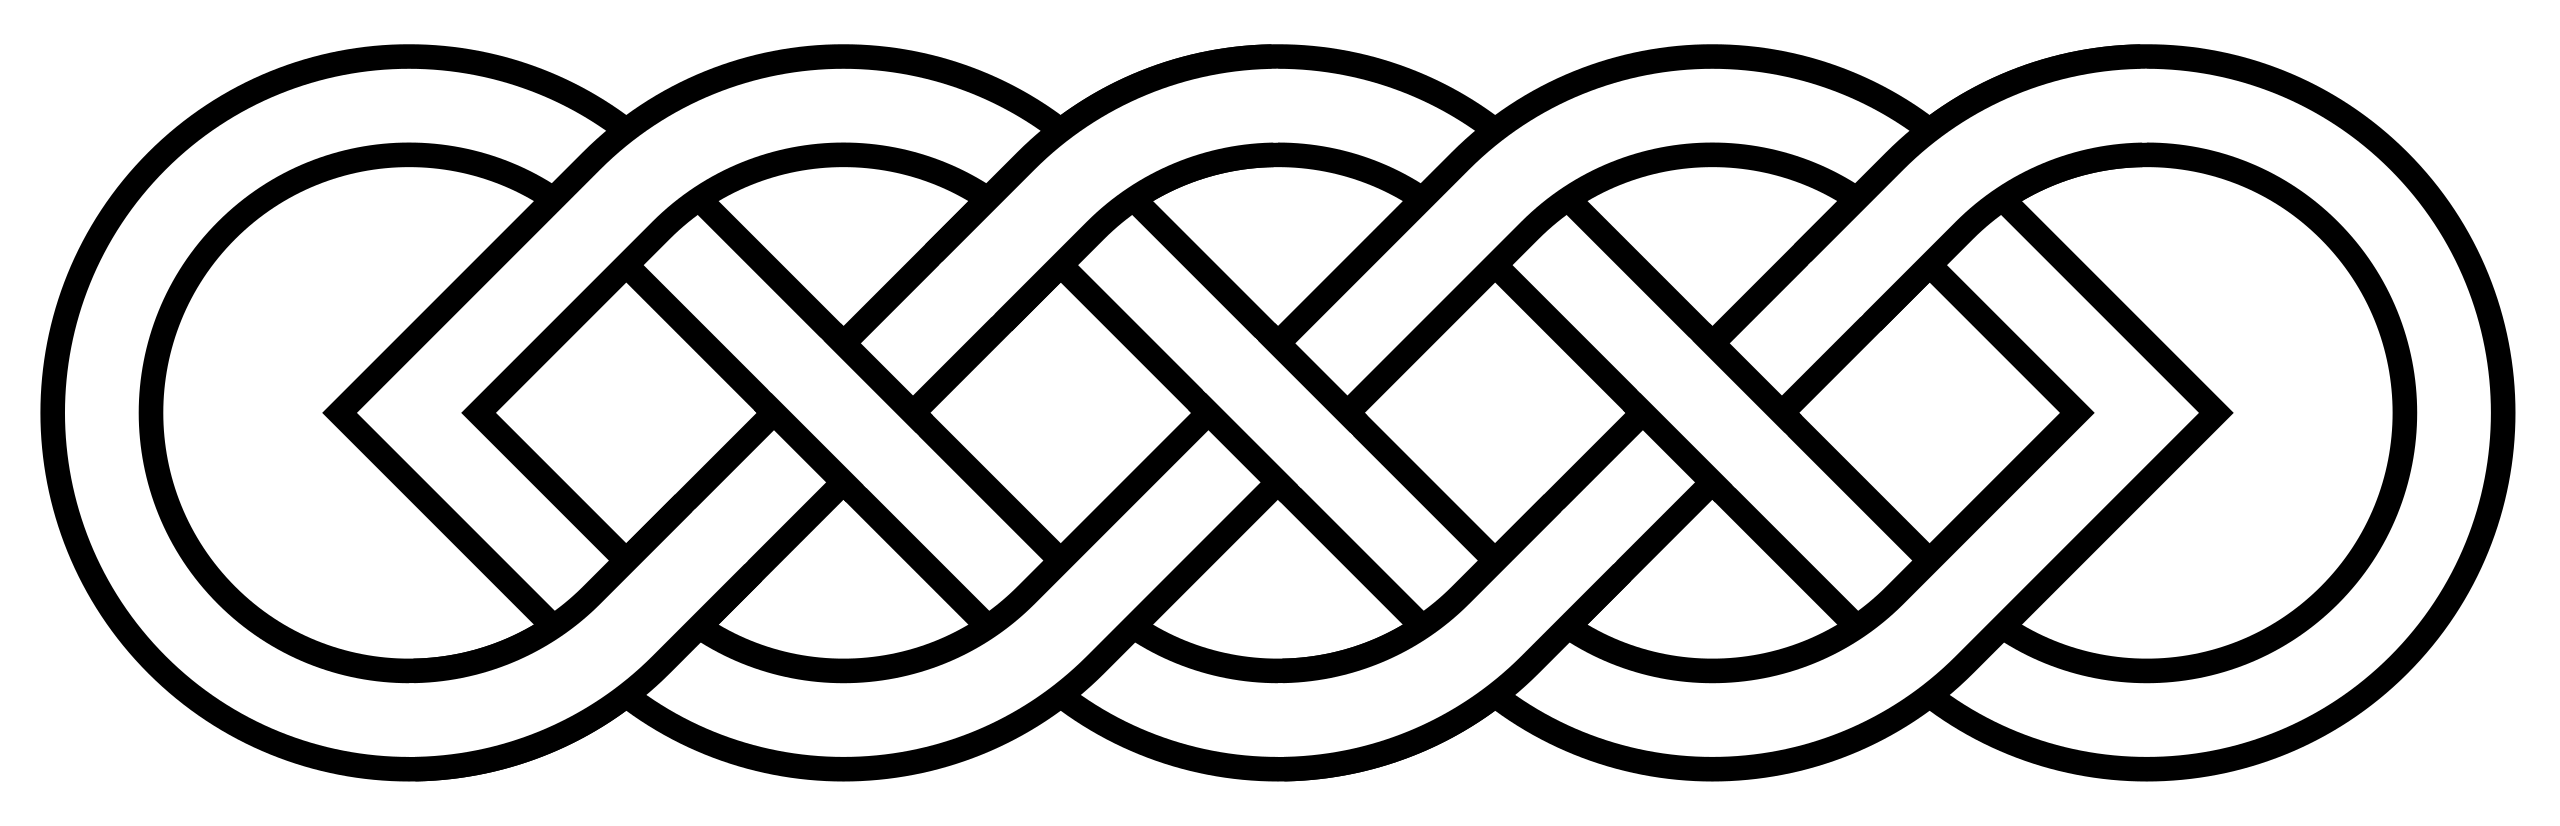 Download File Celtic Knot Basic Svg Wikimedia Commons